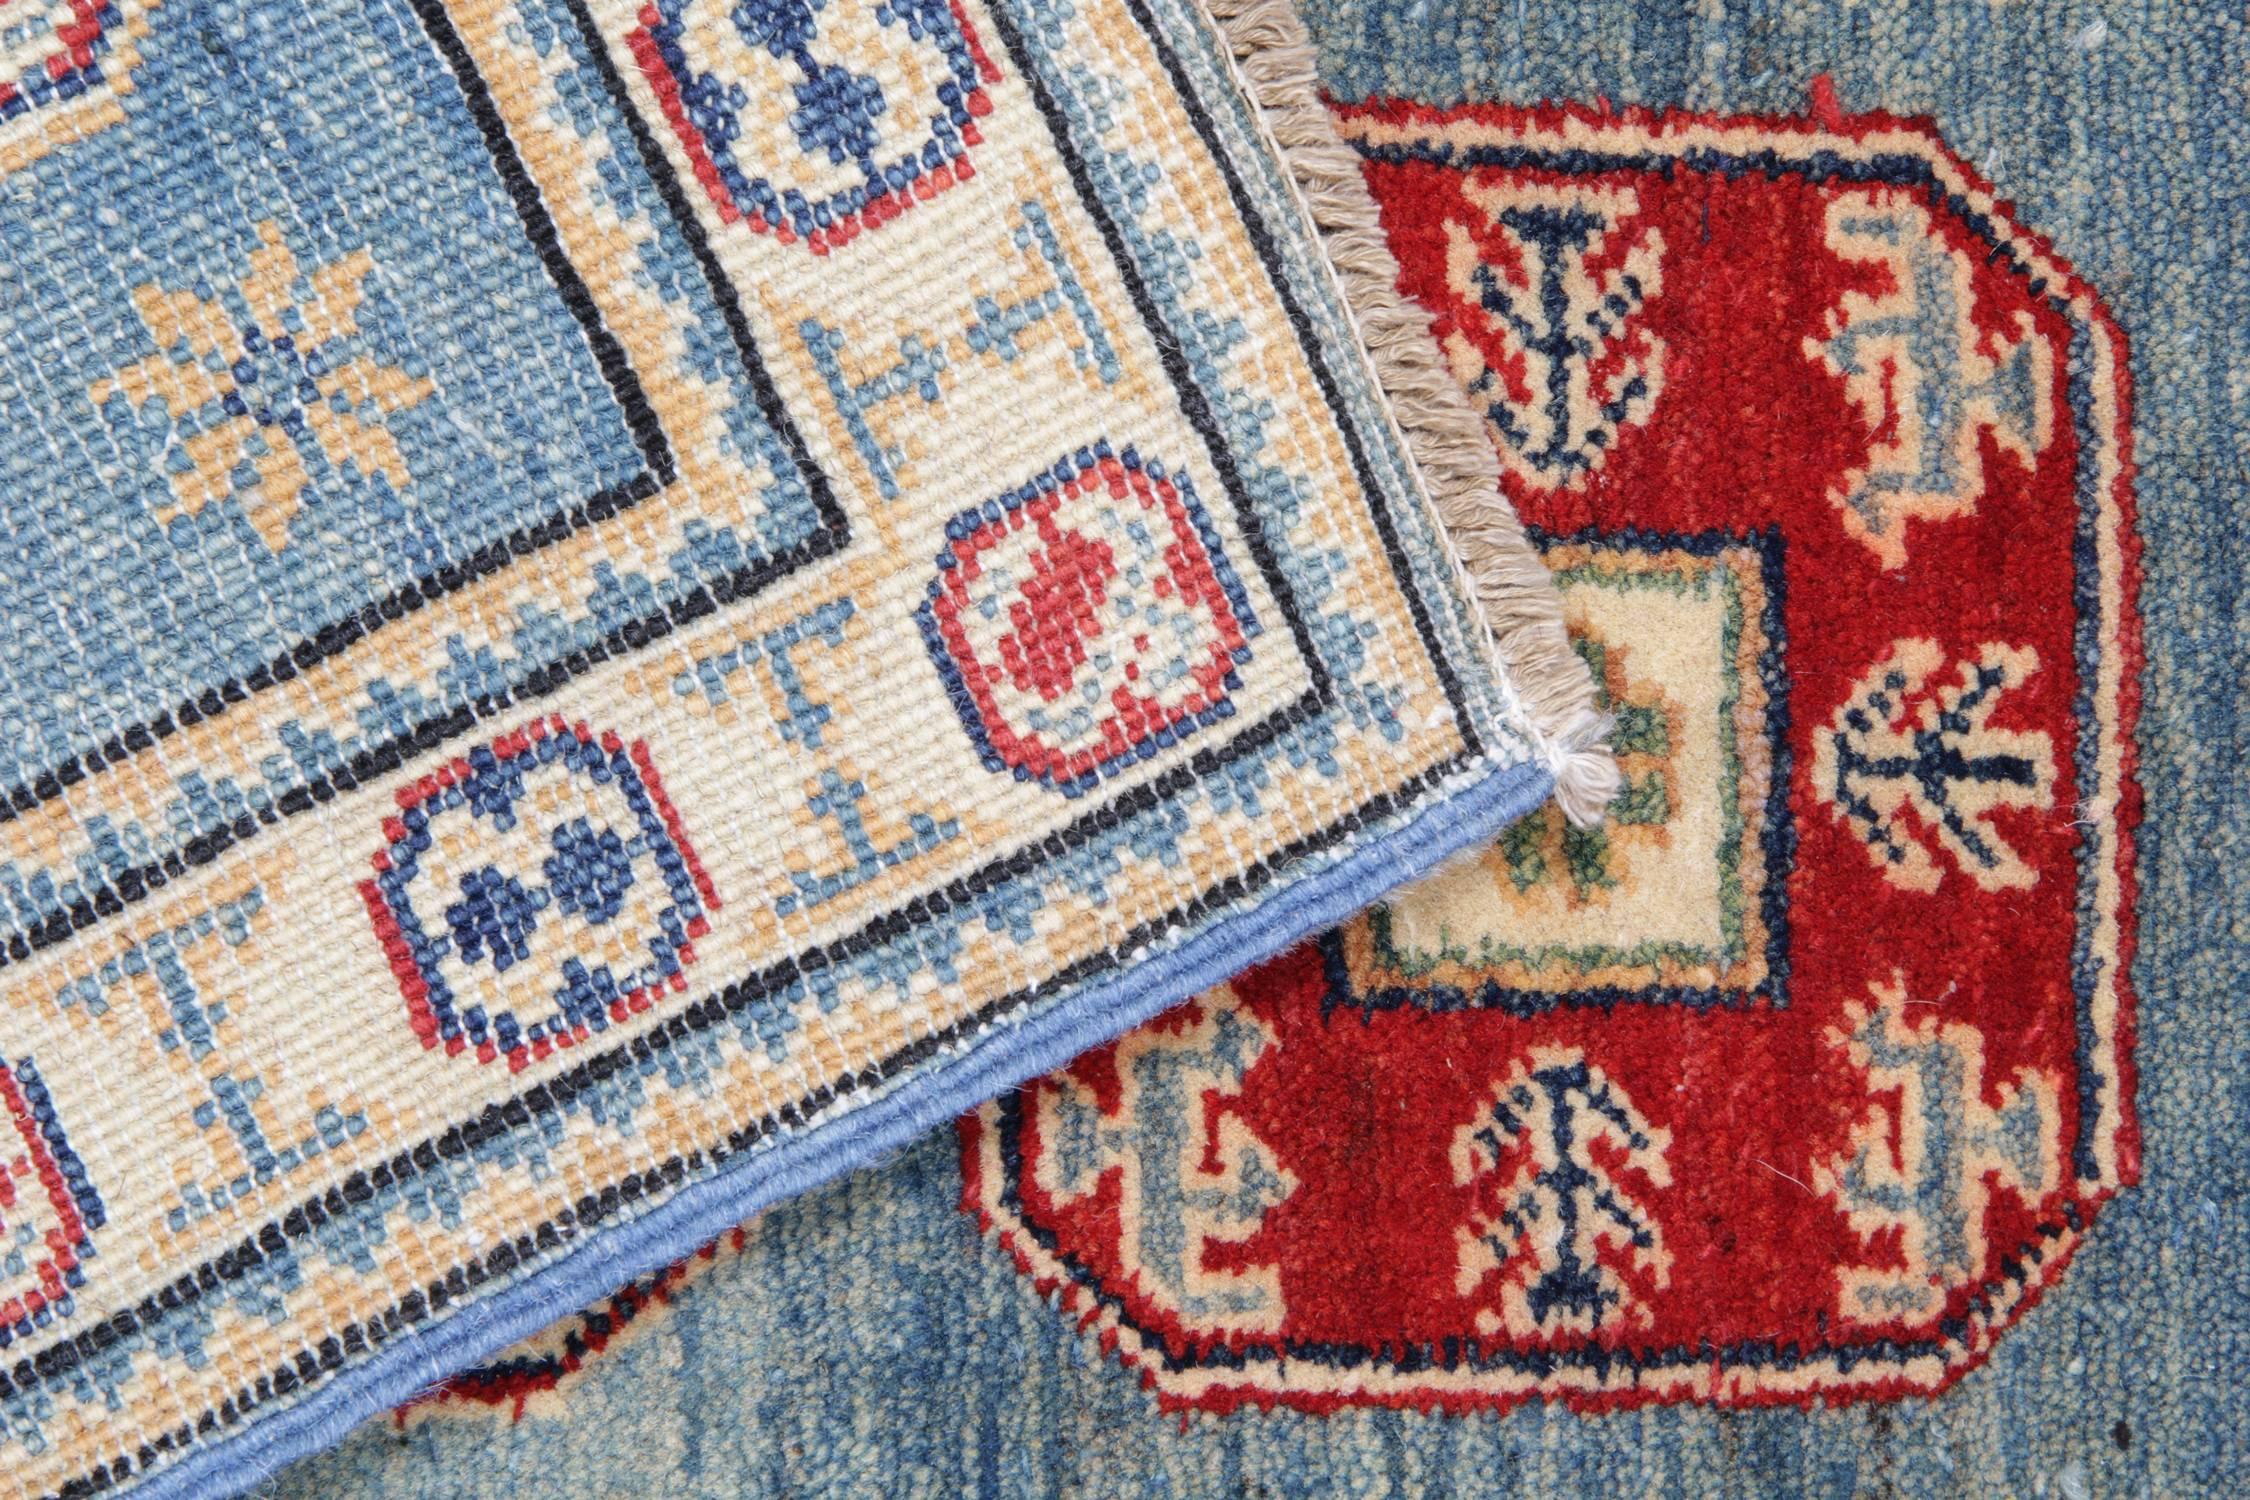 Hand-Knotted Carpet Runners, Persian Blue Rugs for Sale from Kazak